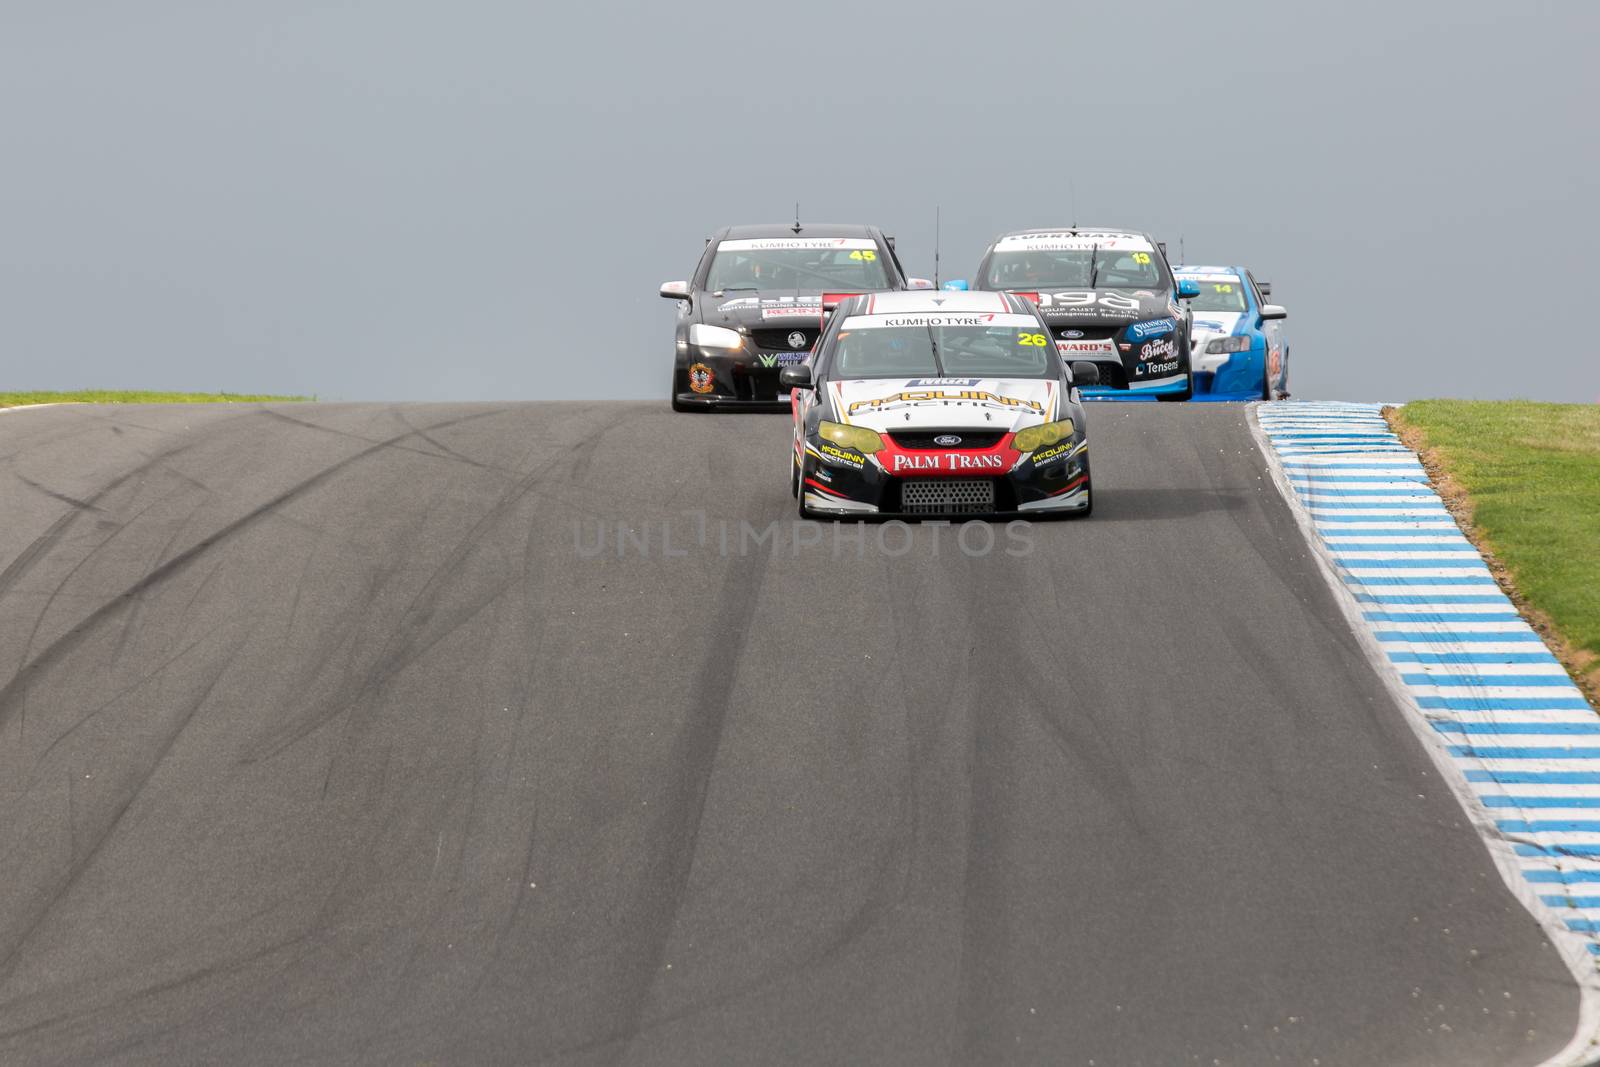 MELBOURNE/AUSTRALIA - SEPTEMBER 10, 2016: Kumho Tyre V8 Touring Cars coming into turn 10 for race 1 at Round 6 of the Shannon's Nationals at Phillip Island GP Track in Victoria, Australia 9-11 September.